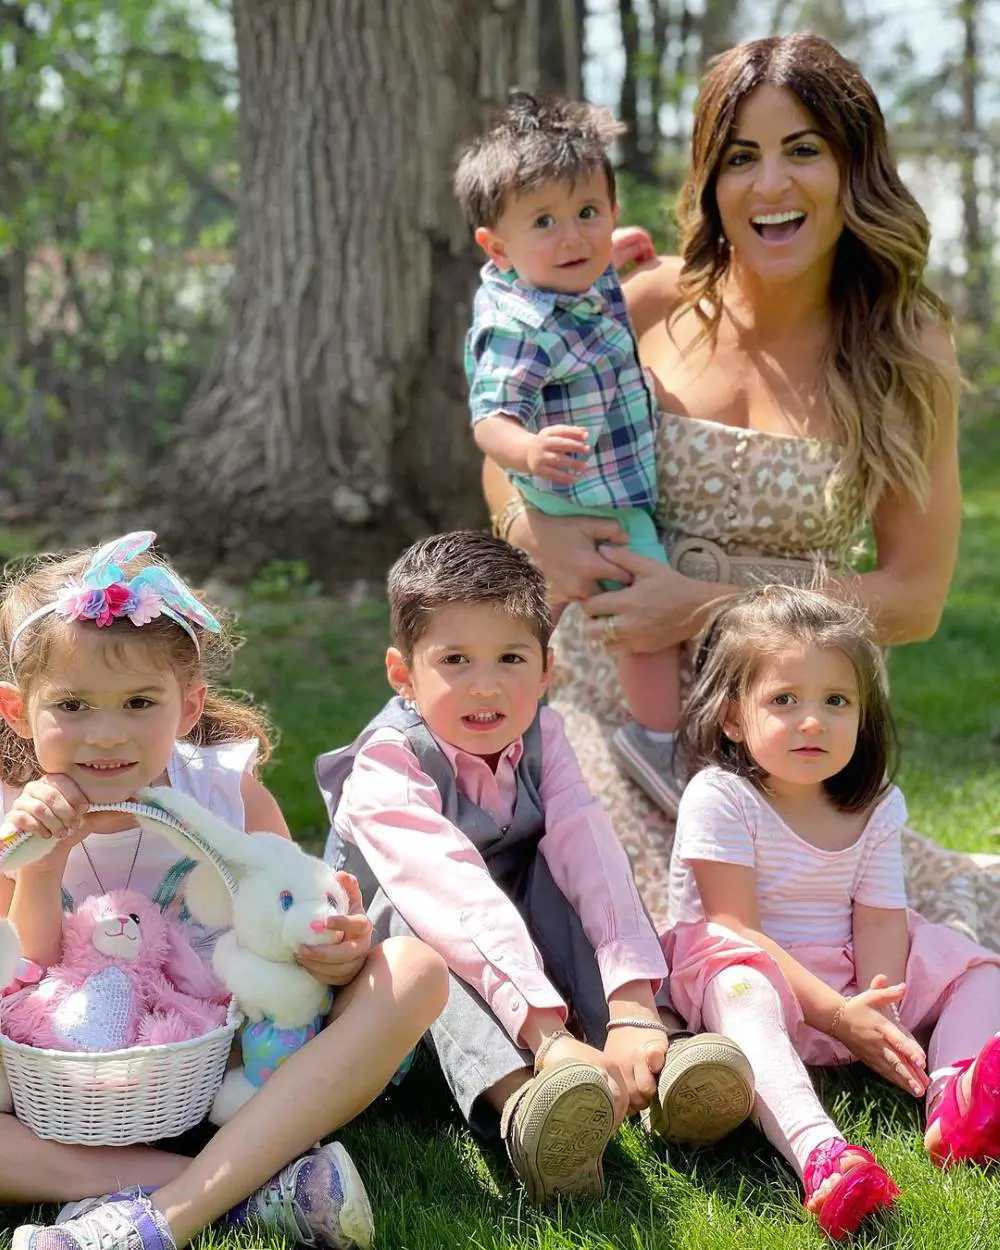 Despite not having kids, the HGTV star has a profound love for children and maintains a close bond with her brother's kids